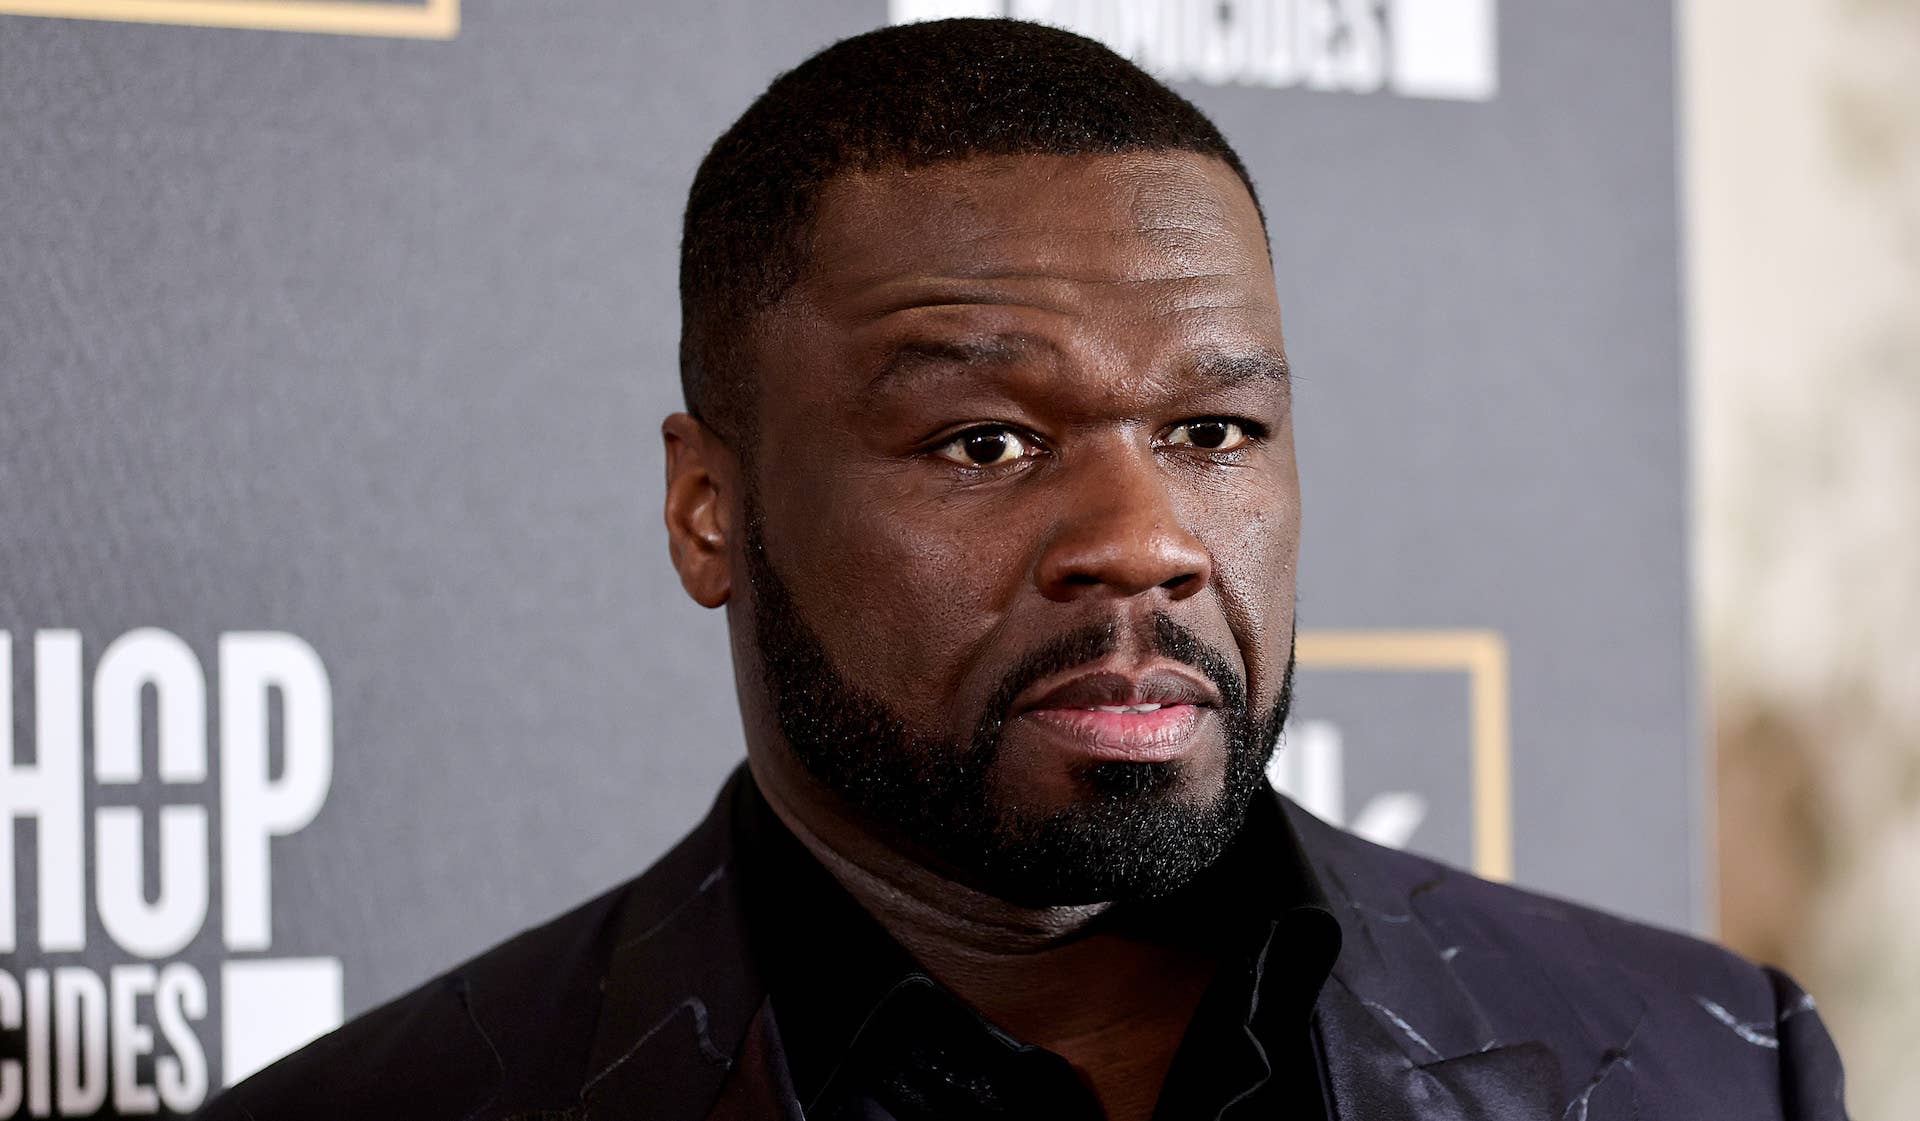 50 Cent attends premiere of Starz's 'Power'